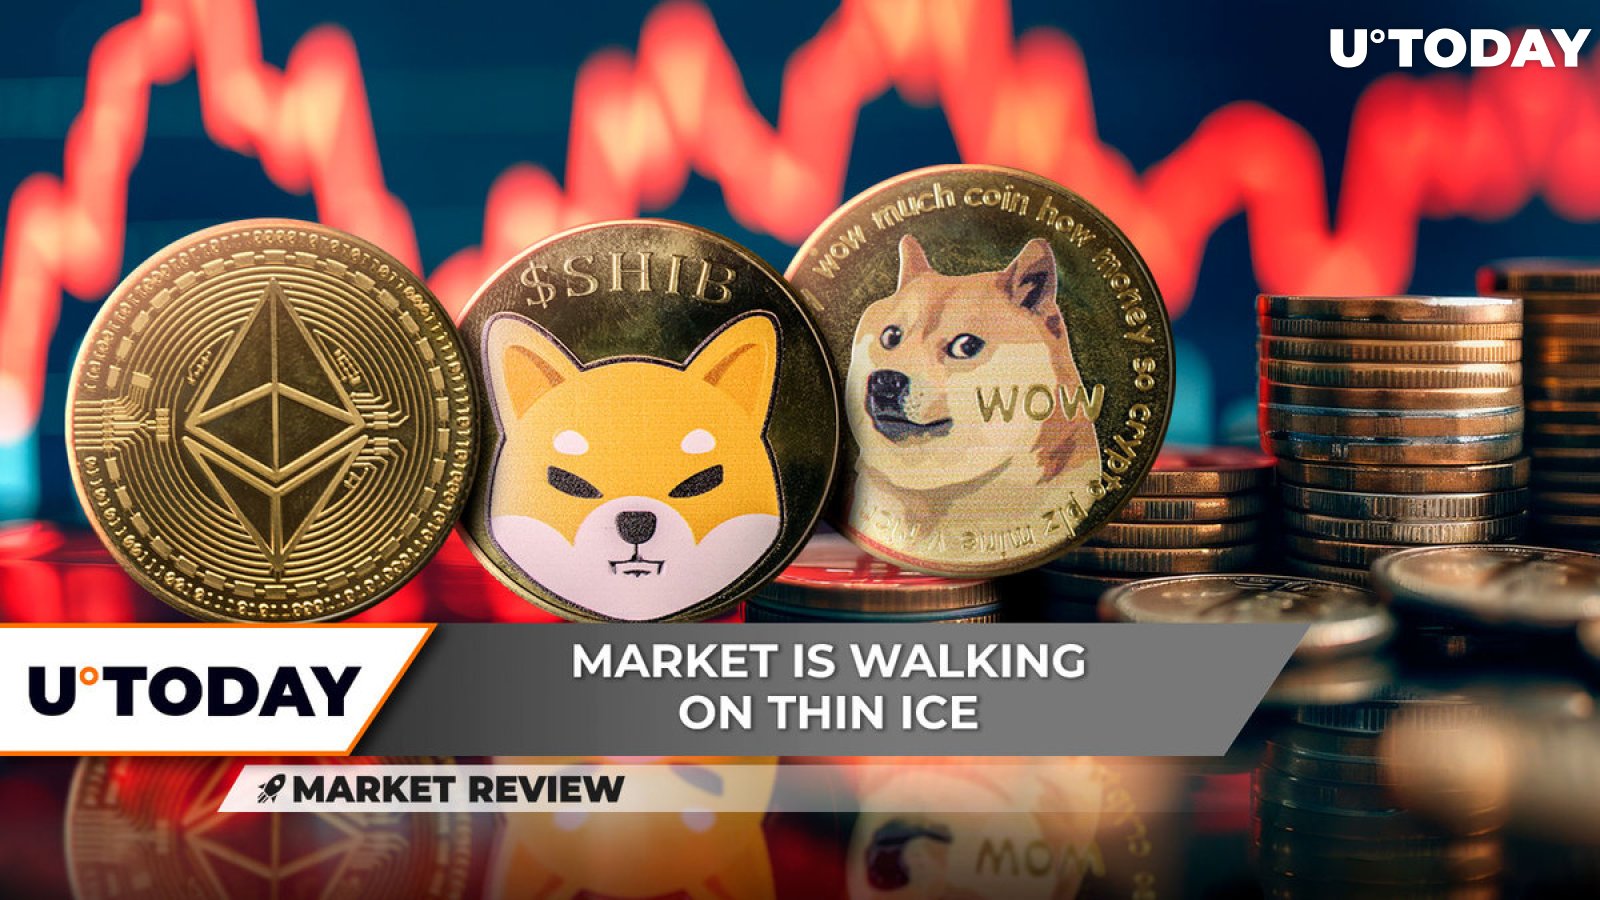 Shiba Inu (SHIB) Hanging on Verge of Cliff, Dogecoin (DOGE) Heading Toward $0.13, Ethereum (ETH) Really Needs This Support